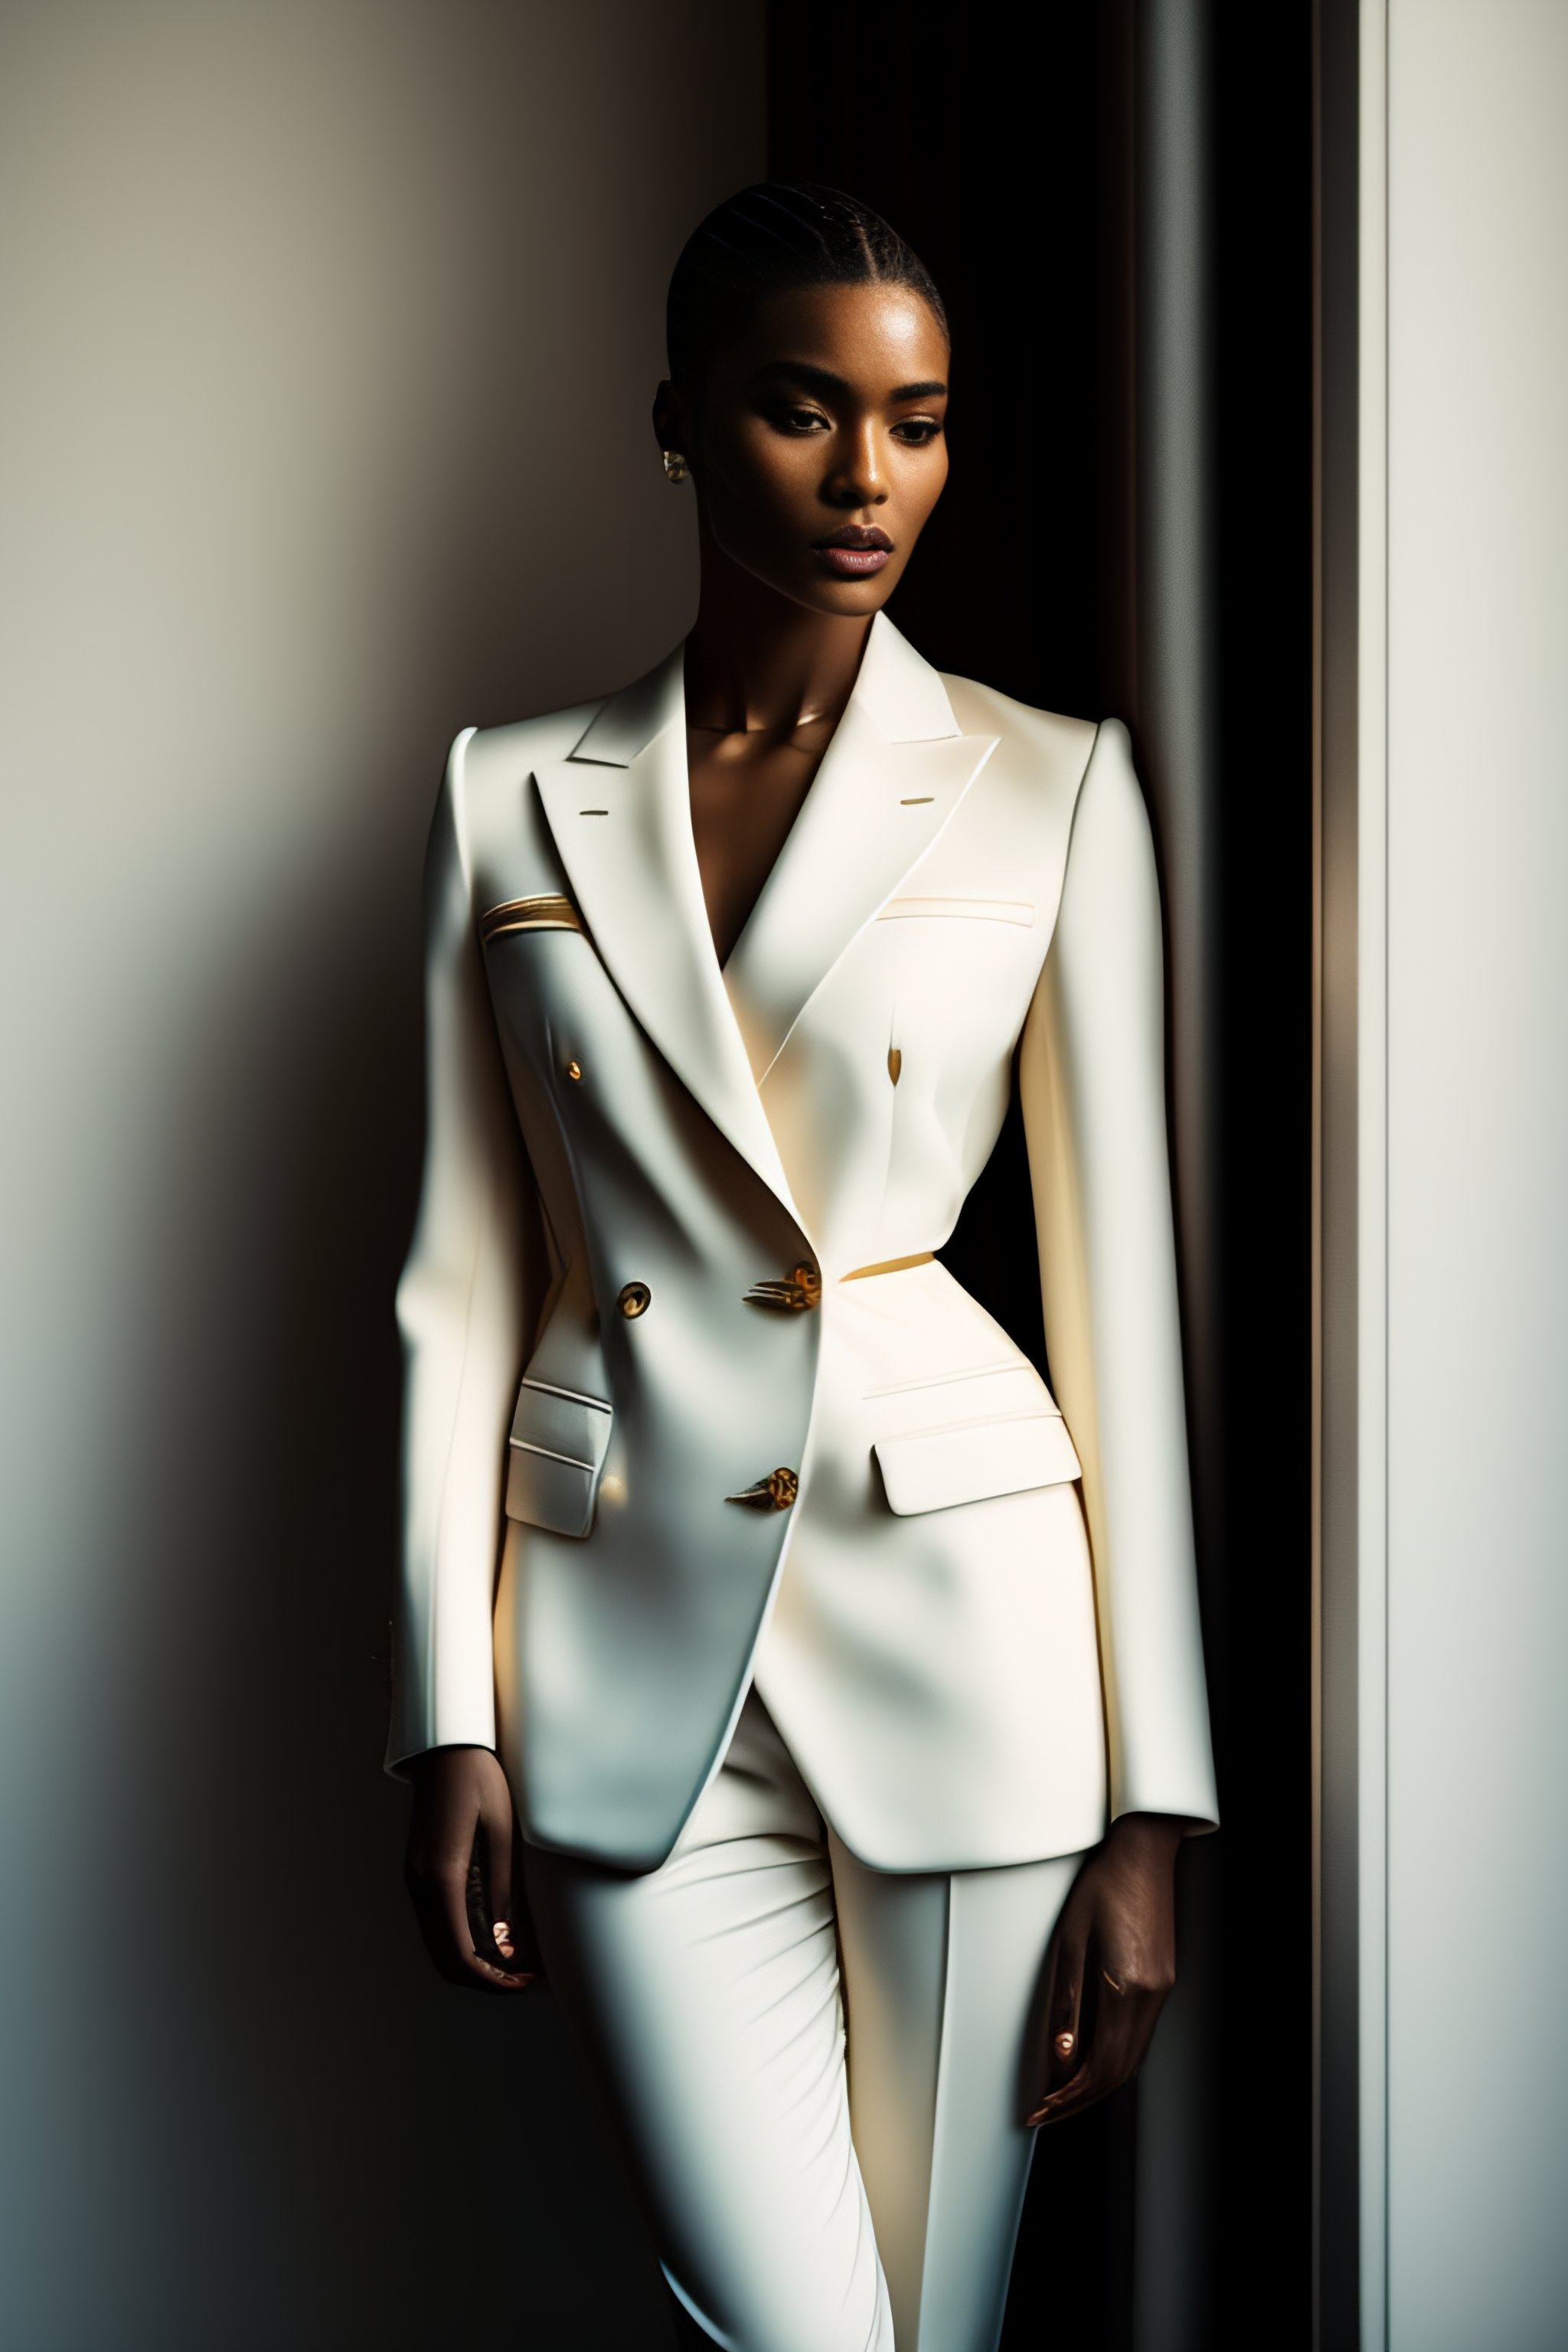 Lexica - An editorial fashion photograph in which a white female model  wears Celine suit standing next to a window